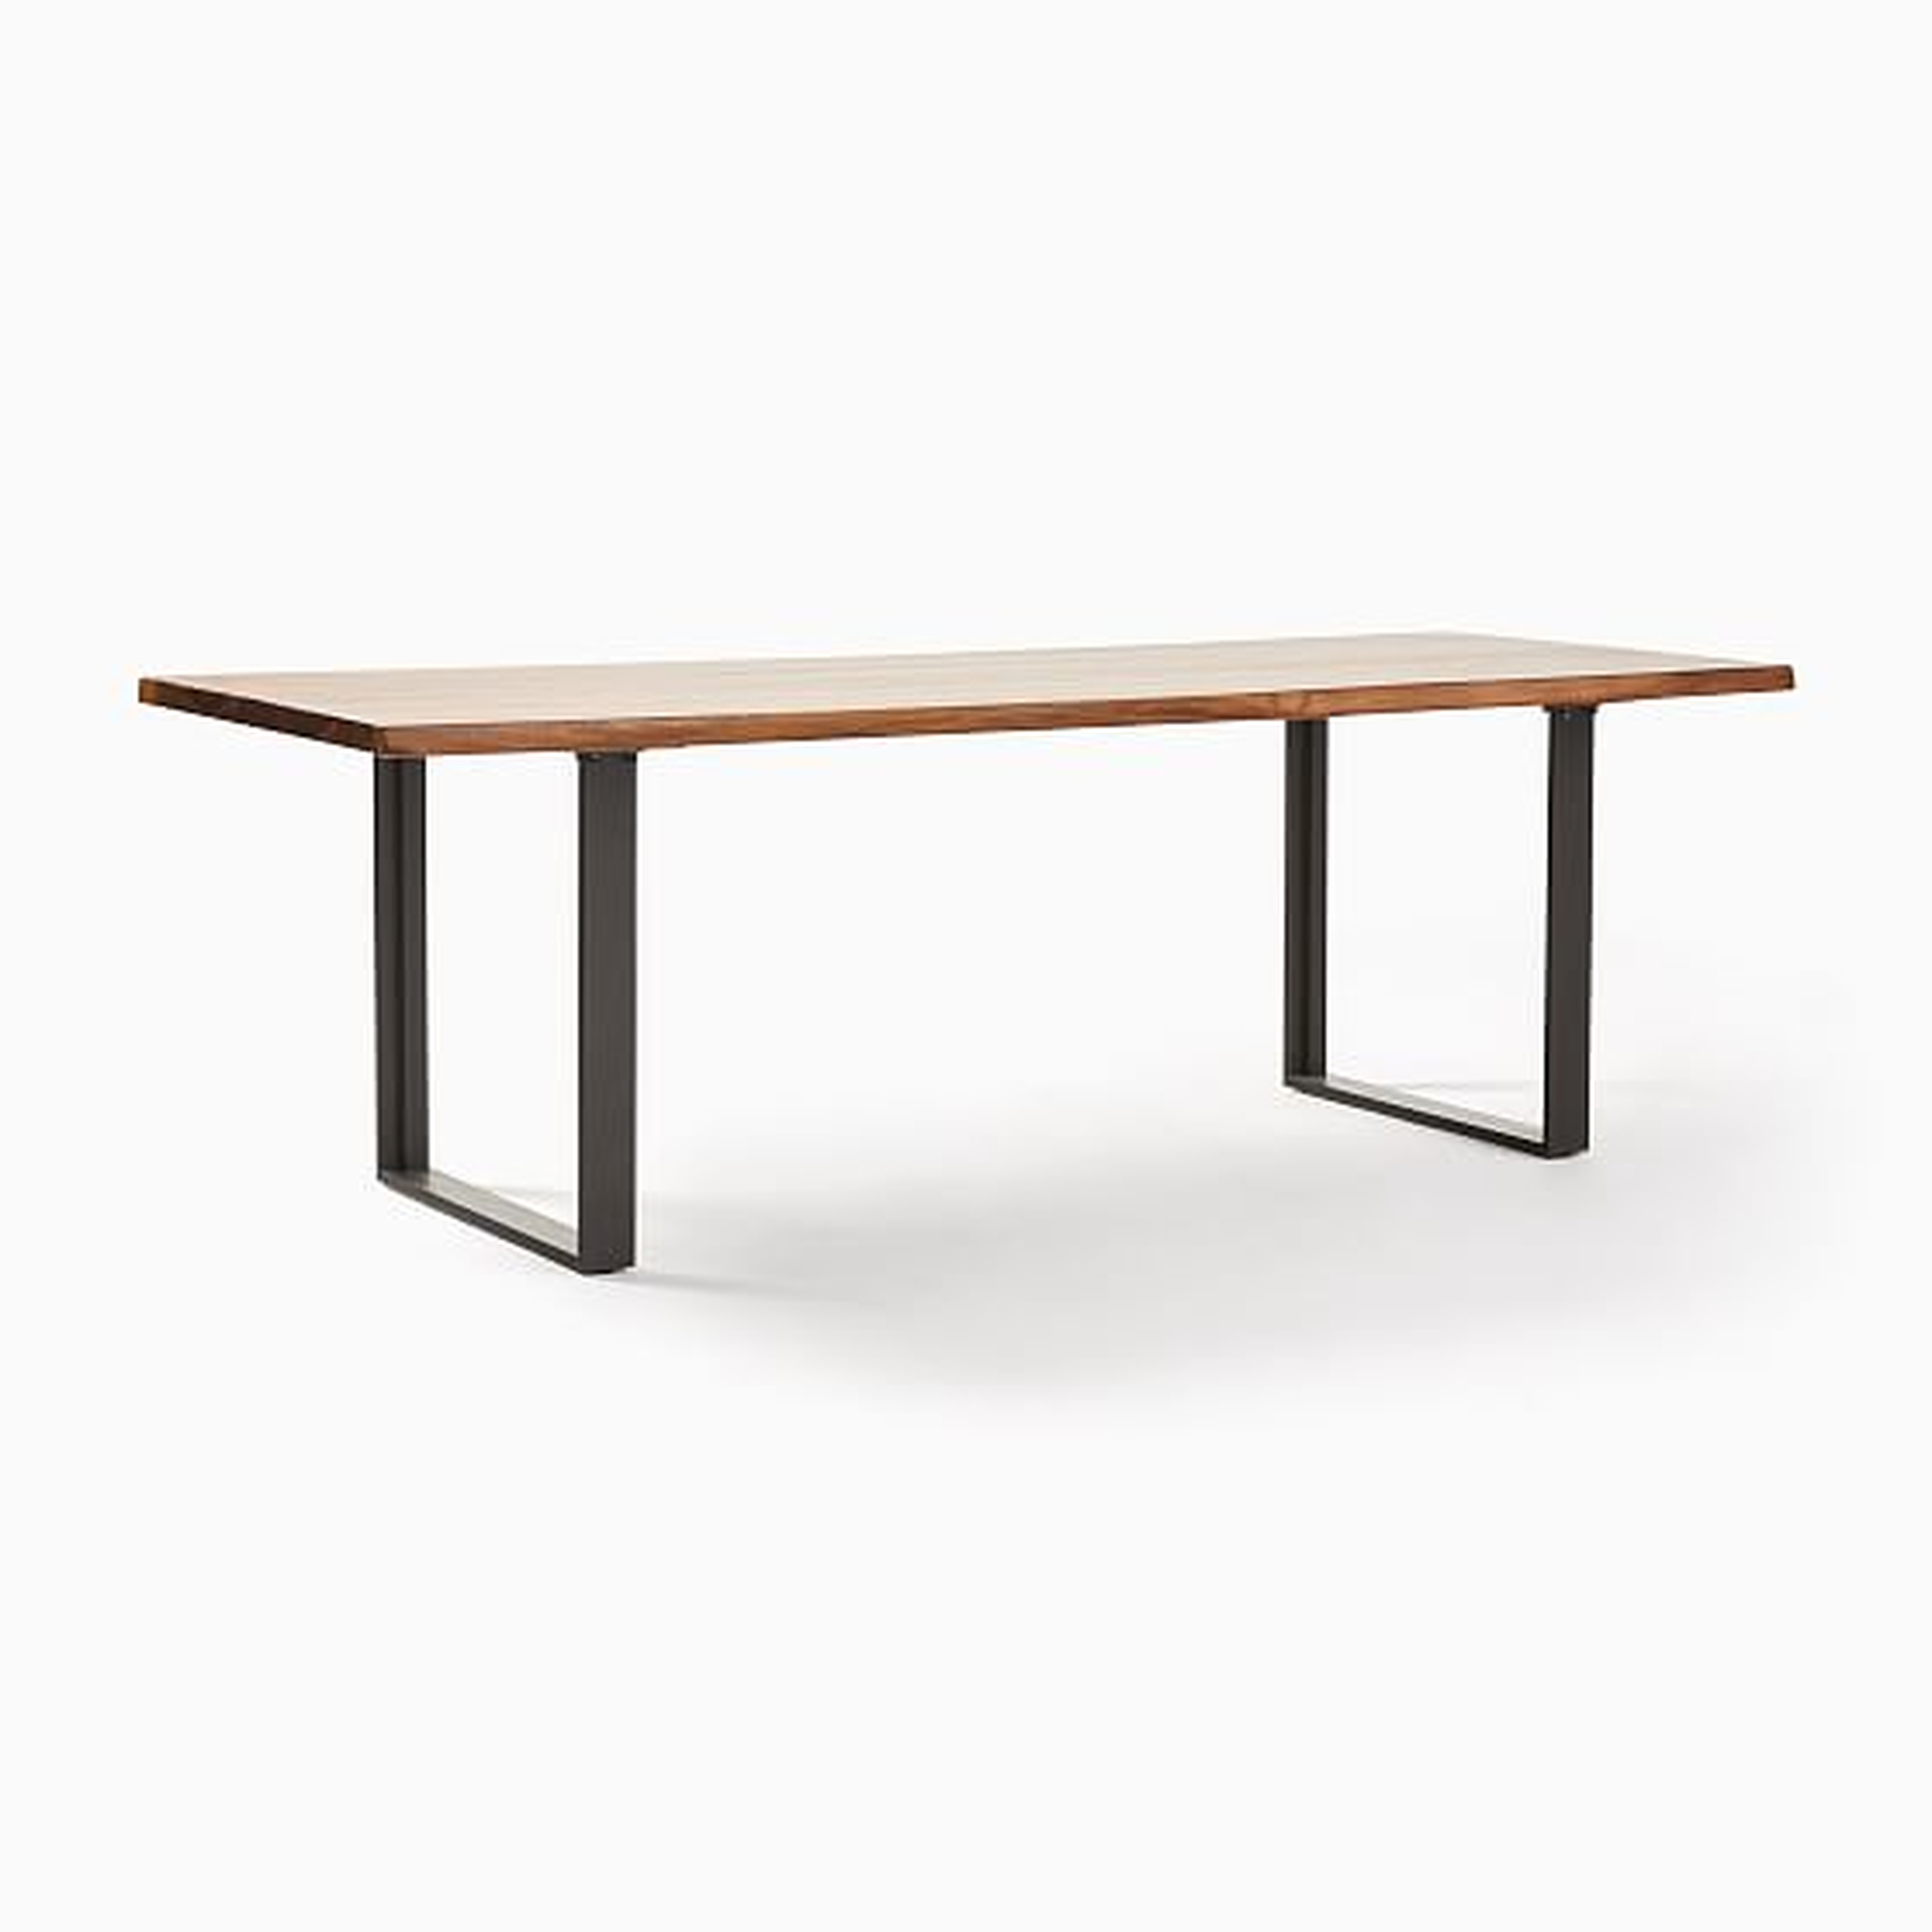 Tomkins Industrial Table, 94", Toffee, Antque Bronze - West Elm